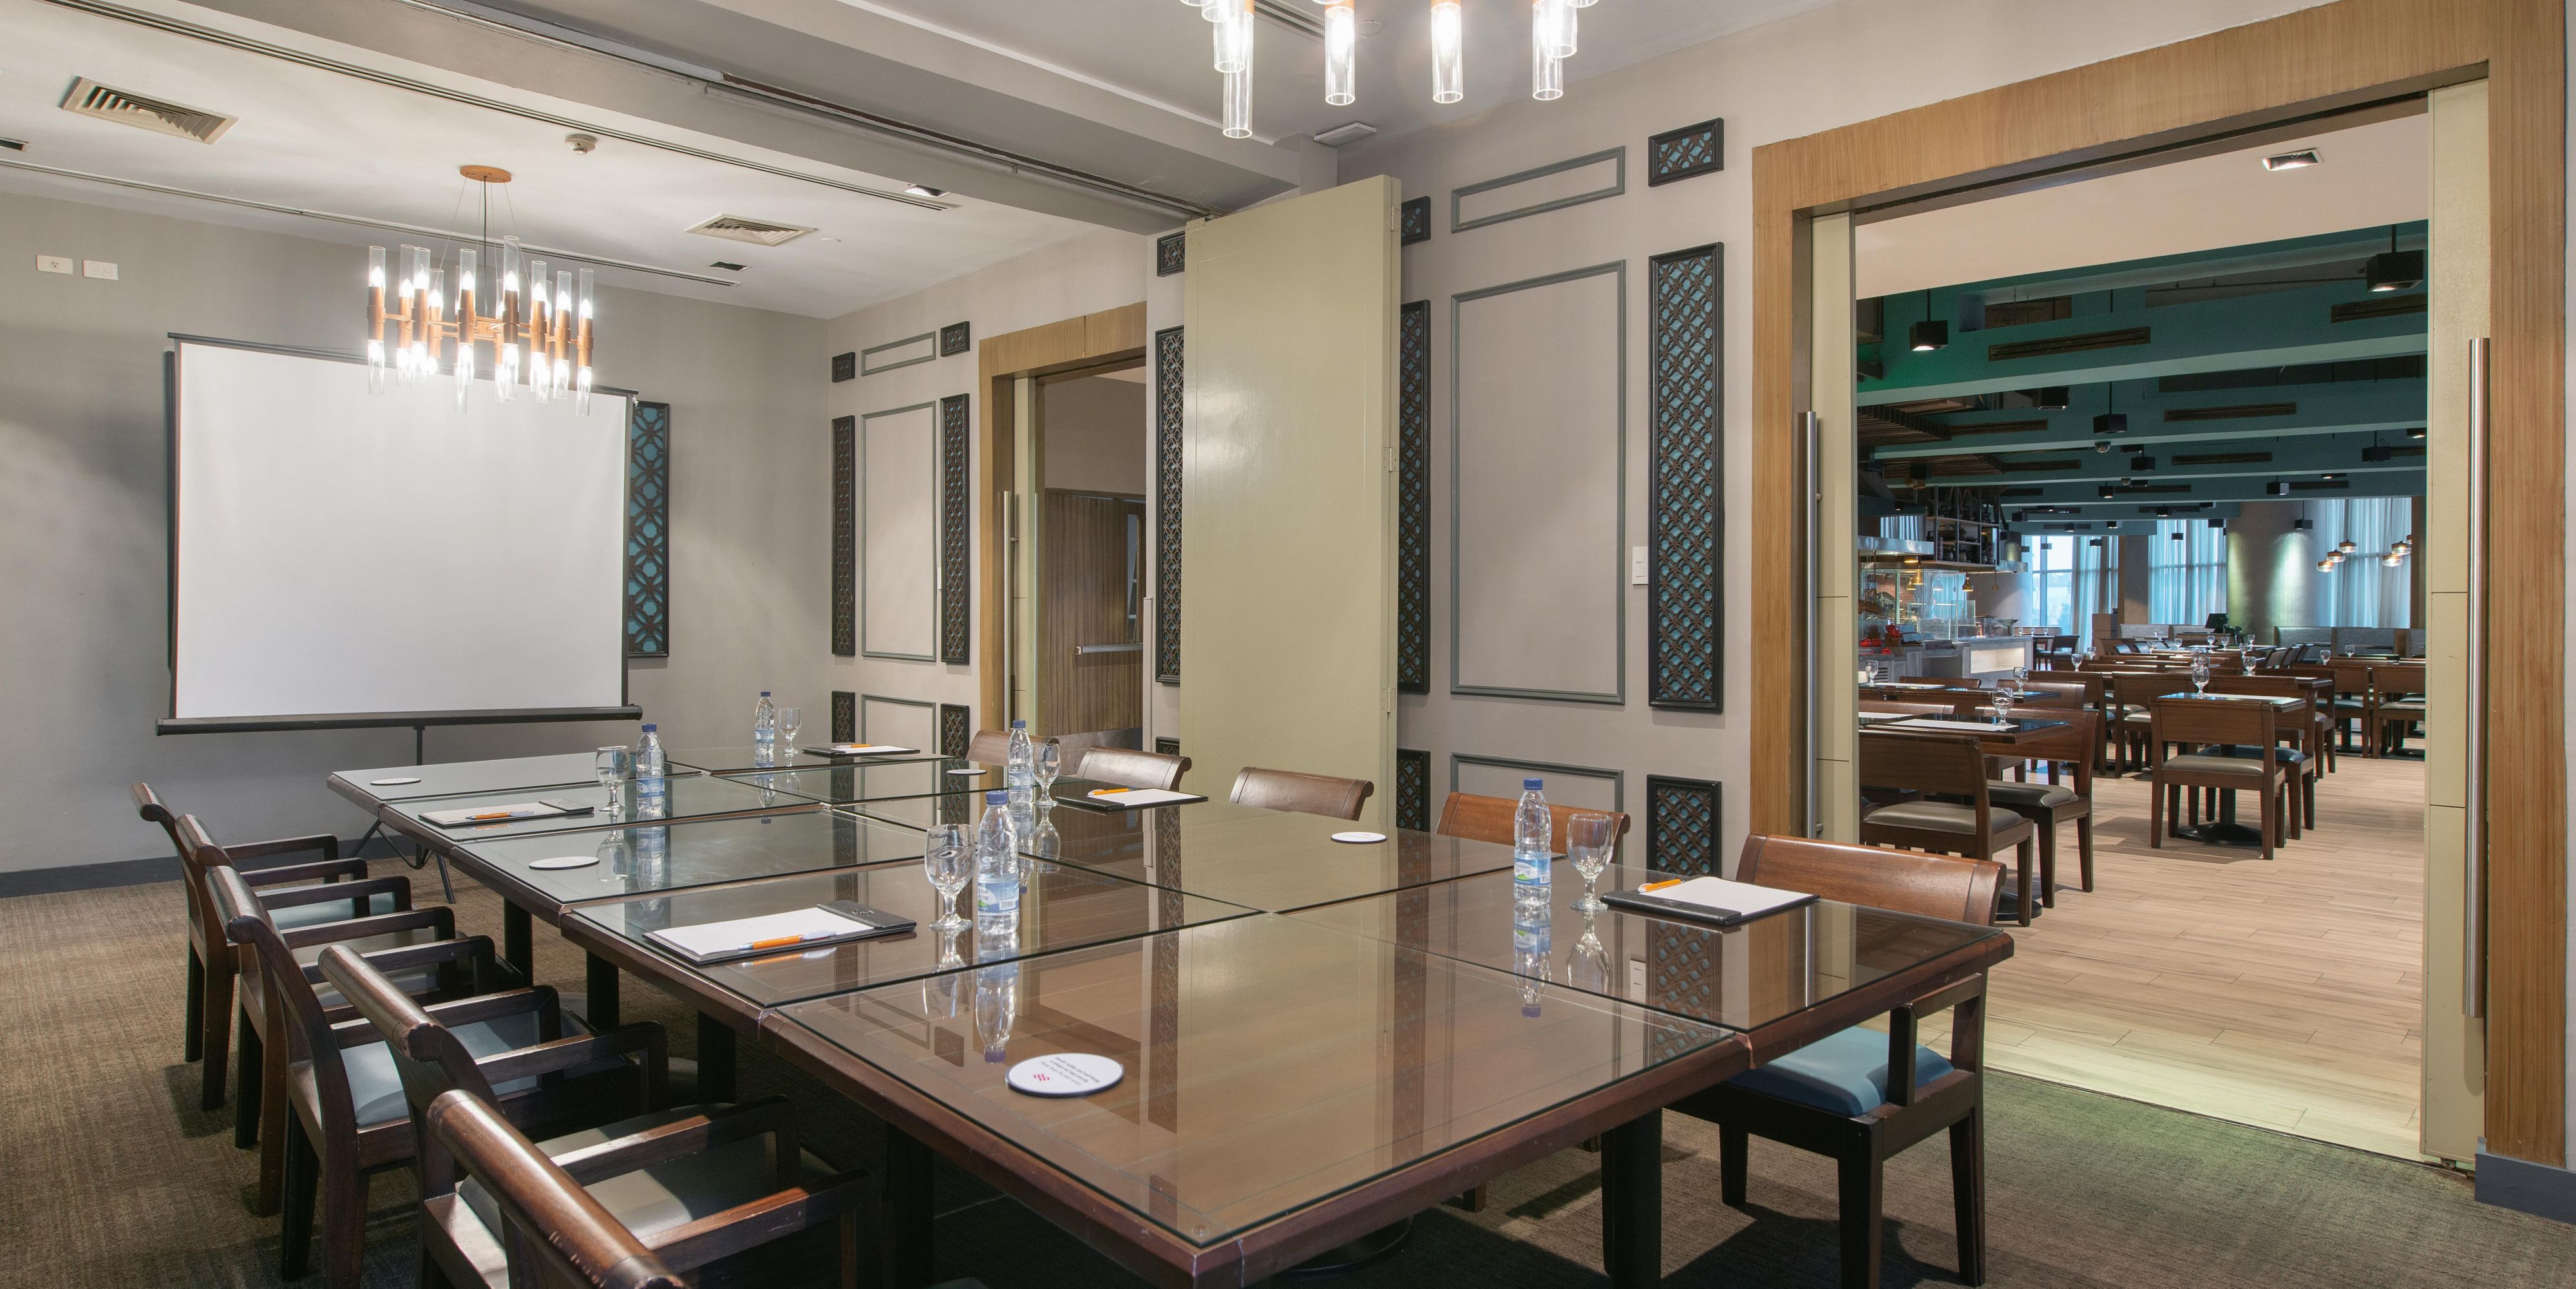 Got intimate lunch or dinner meeting? Our new private room is here